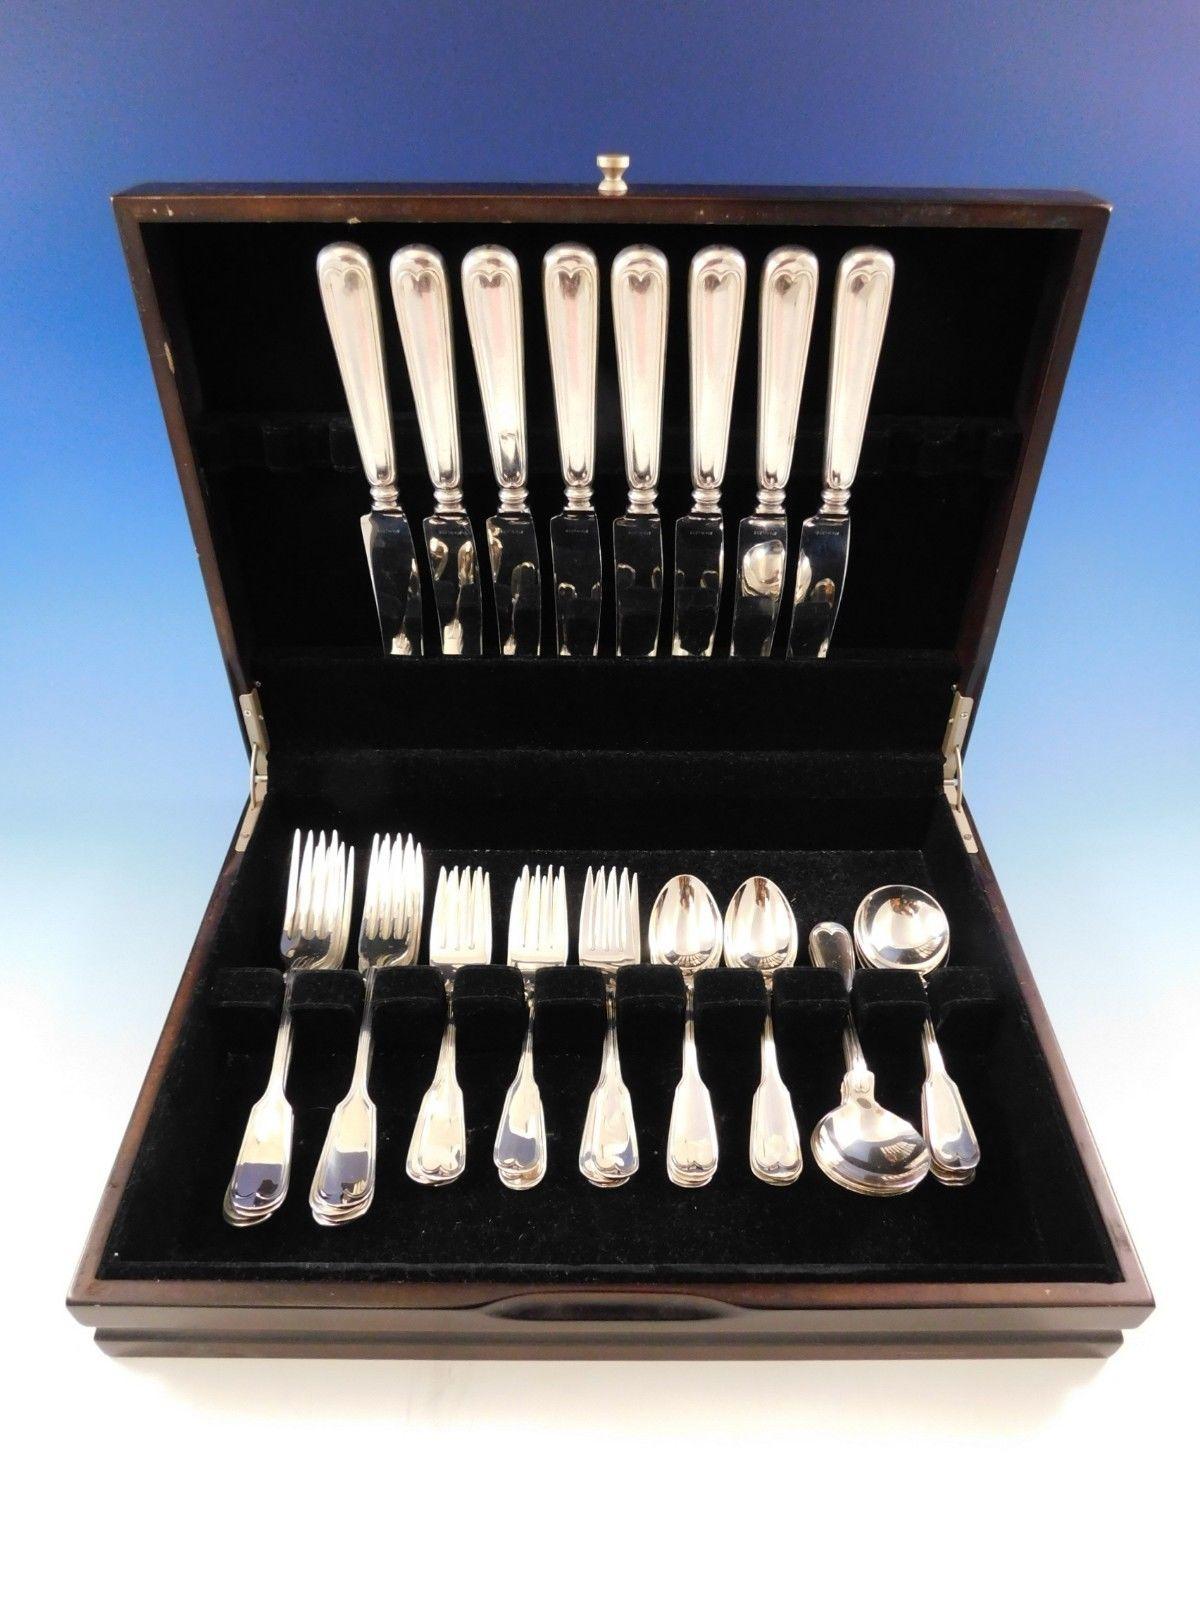 Fiddle Thread by Frank Smith sterling silver flatware set, 40 pieces. This set includes:

8 dinner knives, 9 3/4